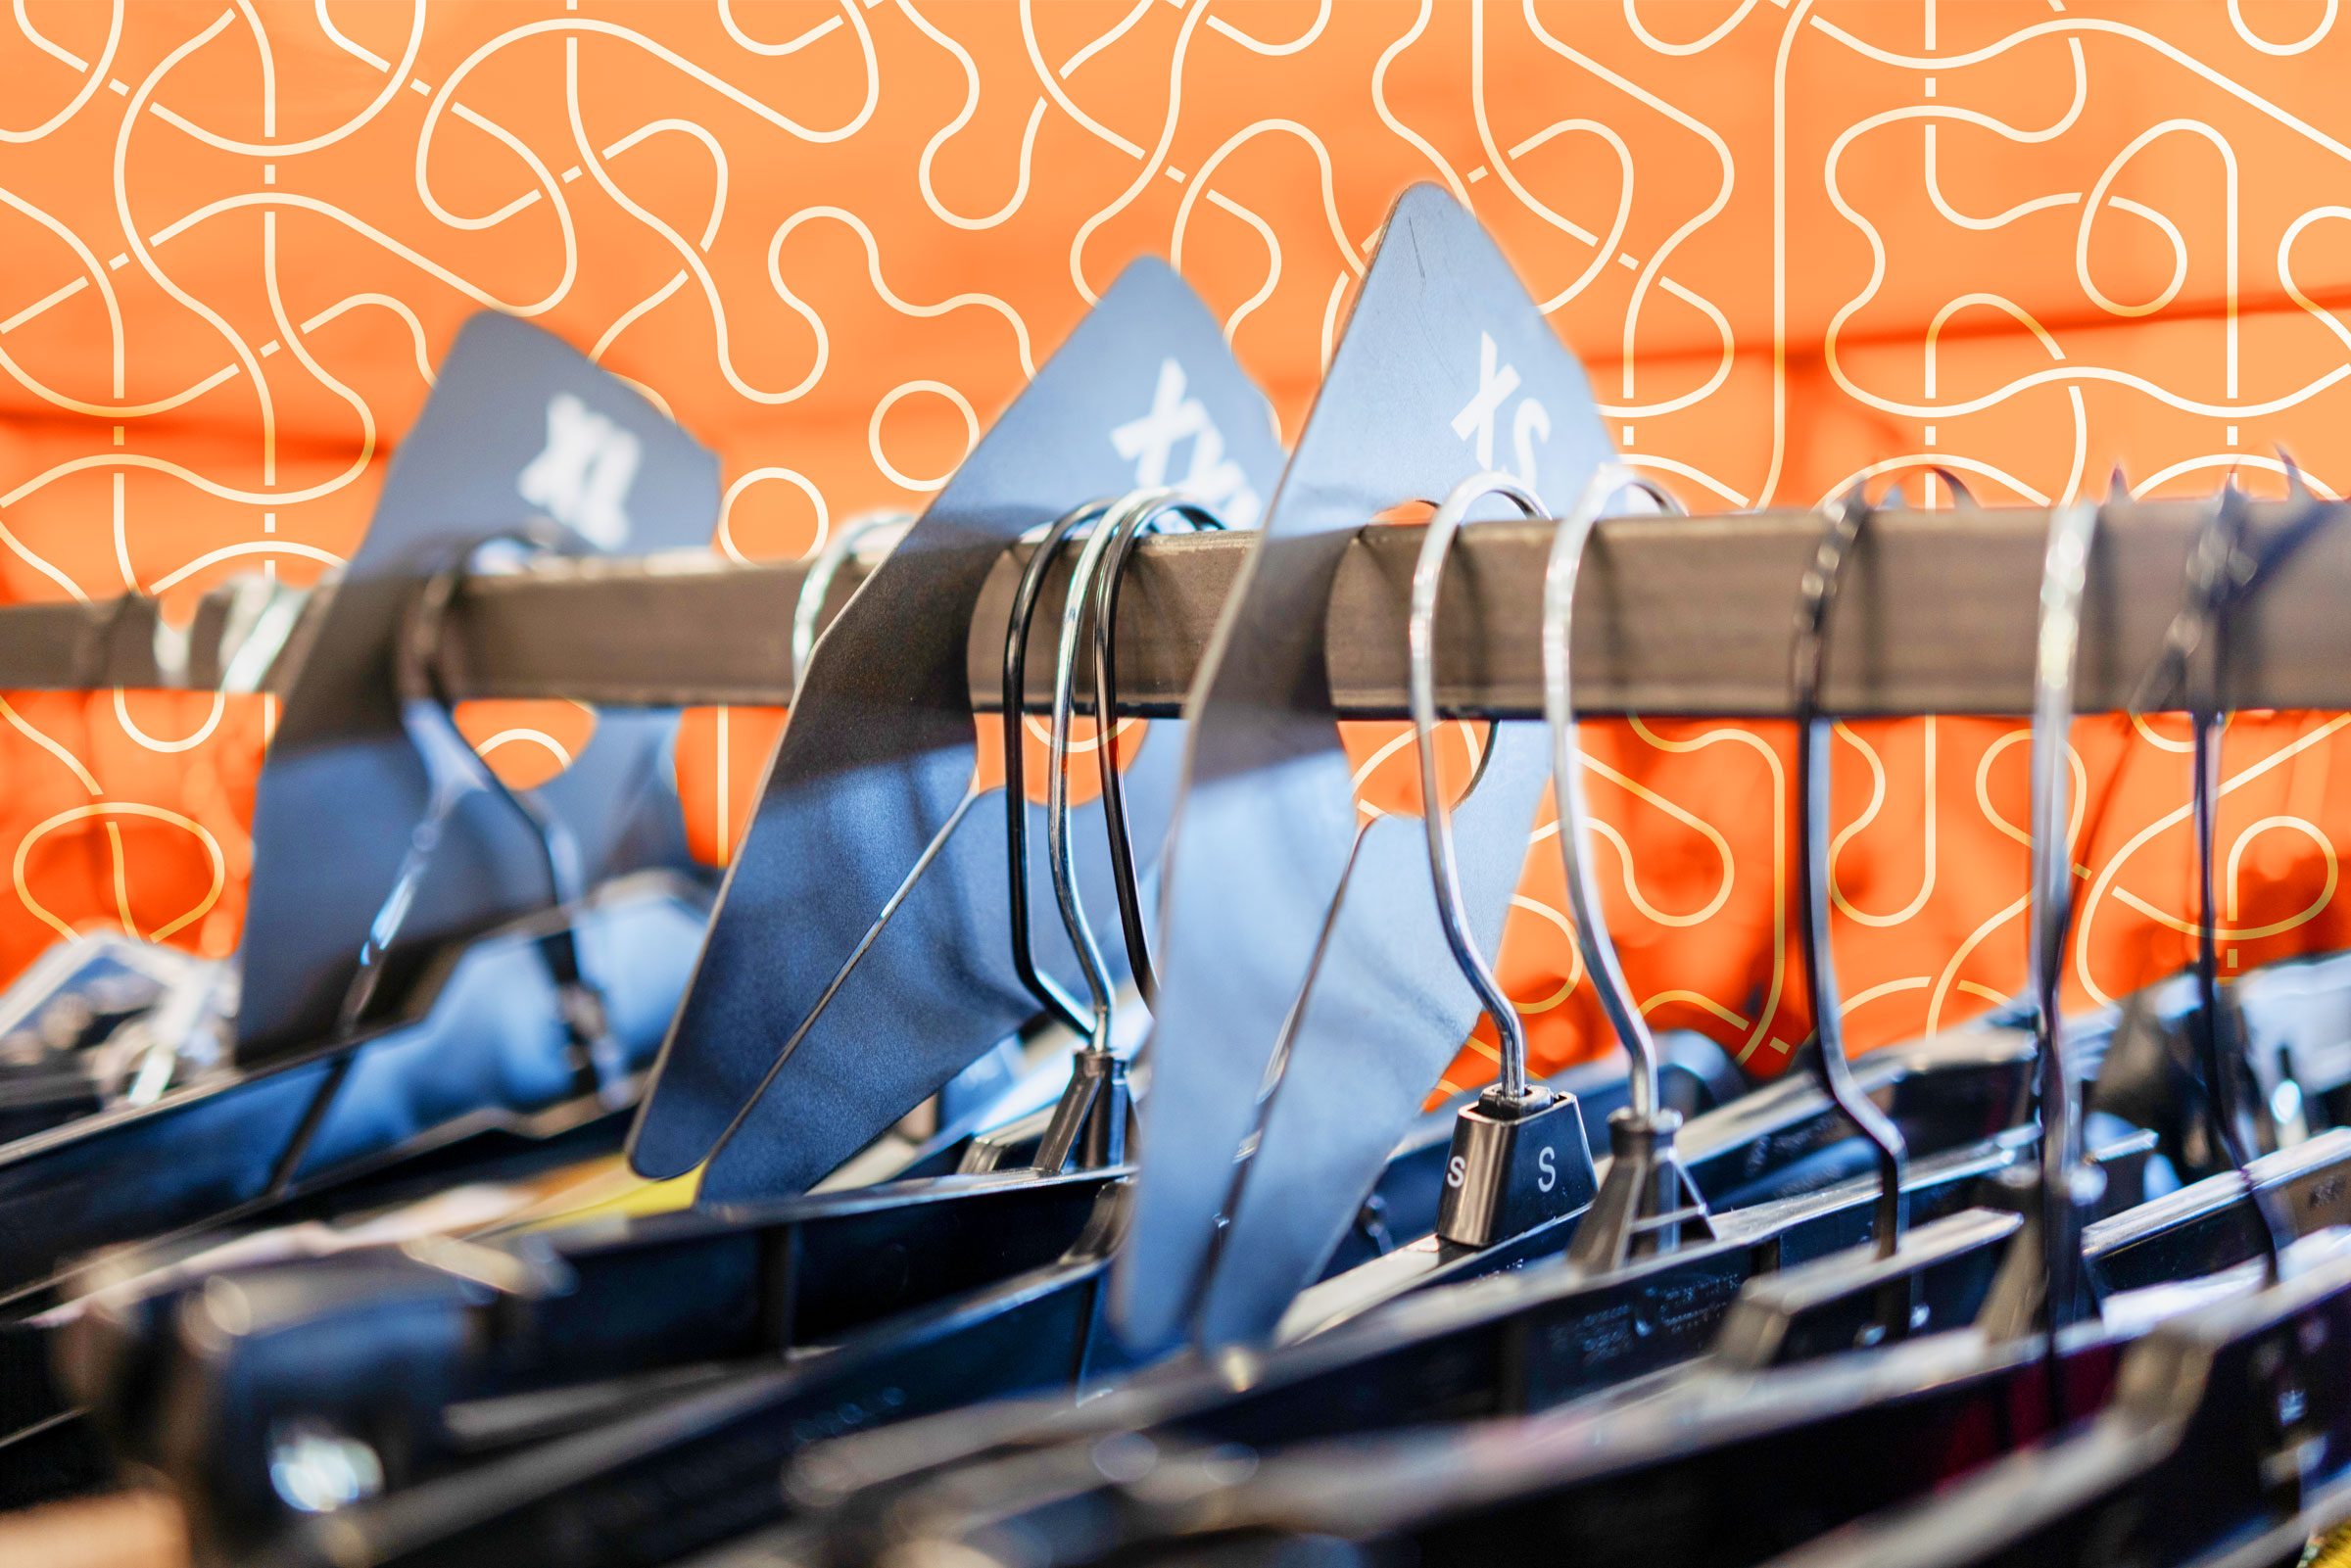 hangers with different sizes in a store with an orange swirly graphic background